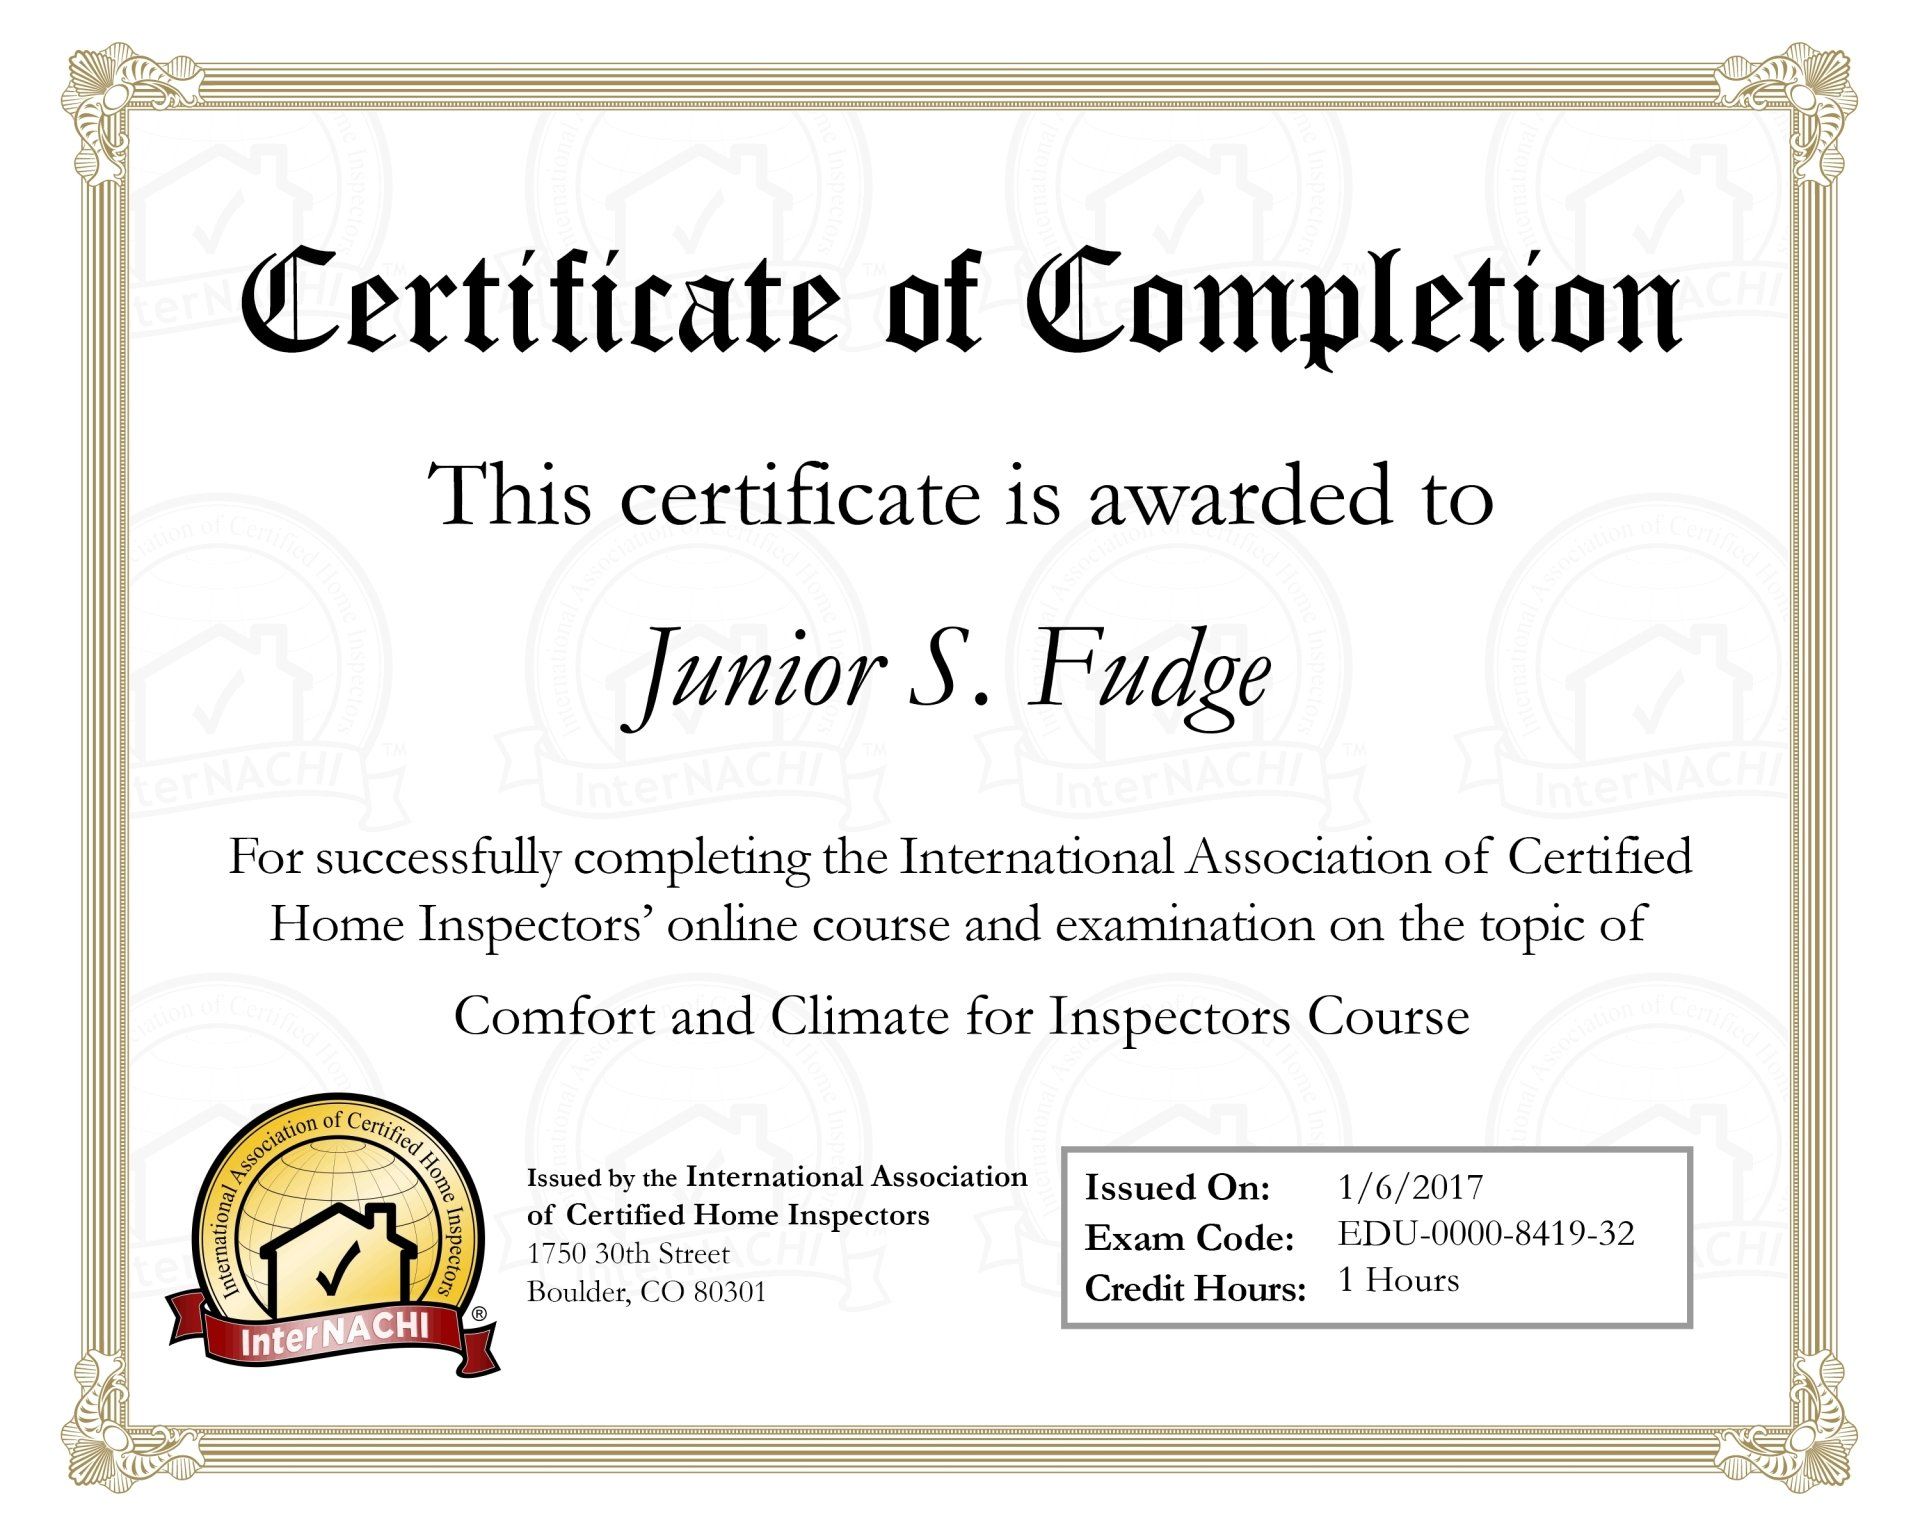 comfort and climate inspection - PEI home inspector